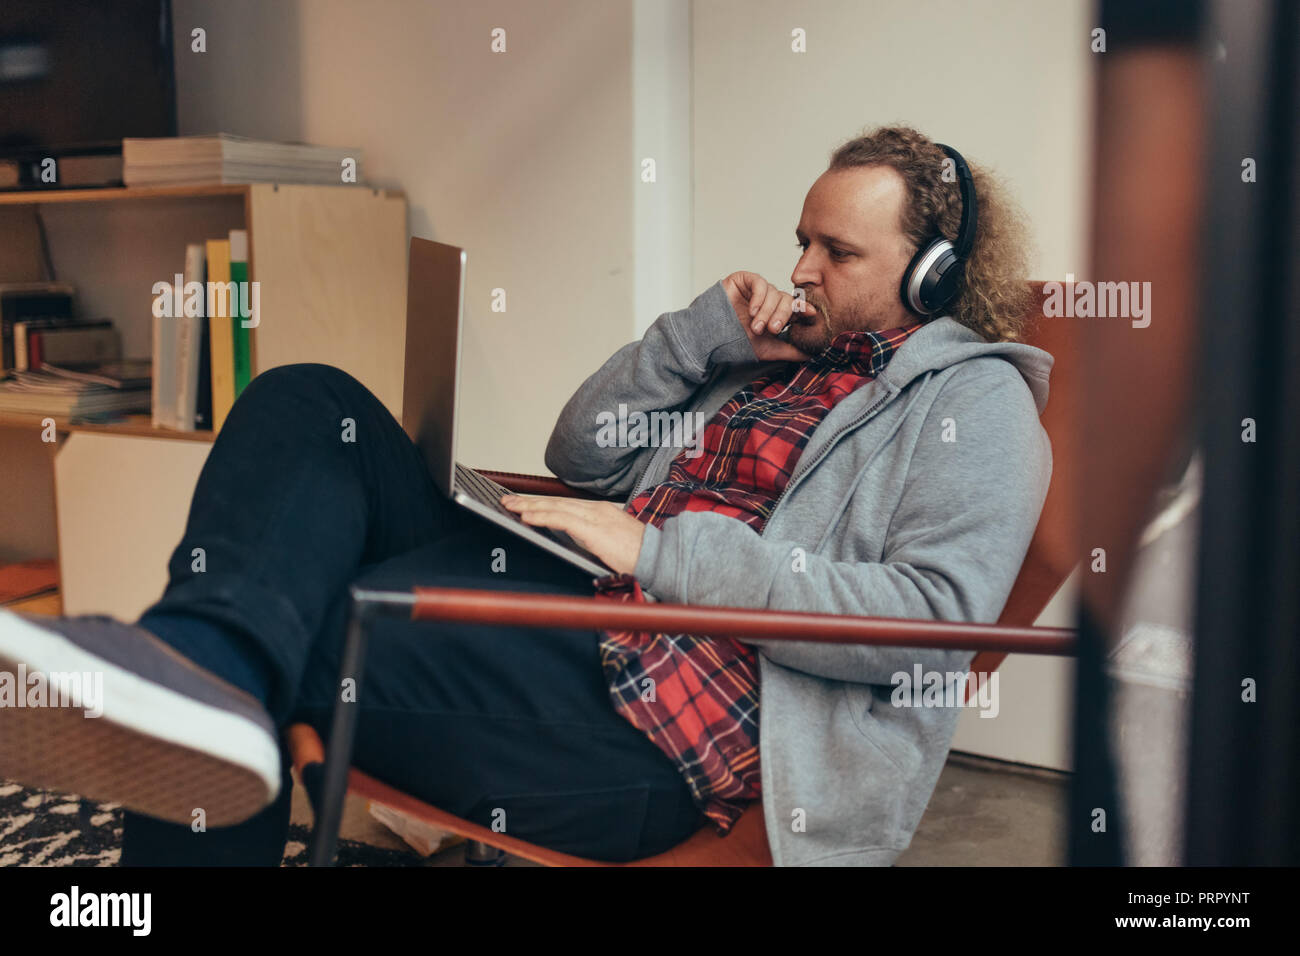 Man in casuals relaxing on a lounge chair looking at his laptop and thinking. Computer programmer working over a new software development. Stock Photo